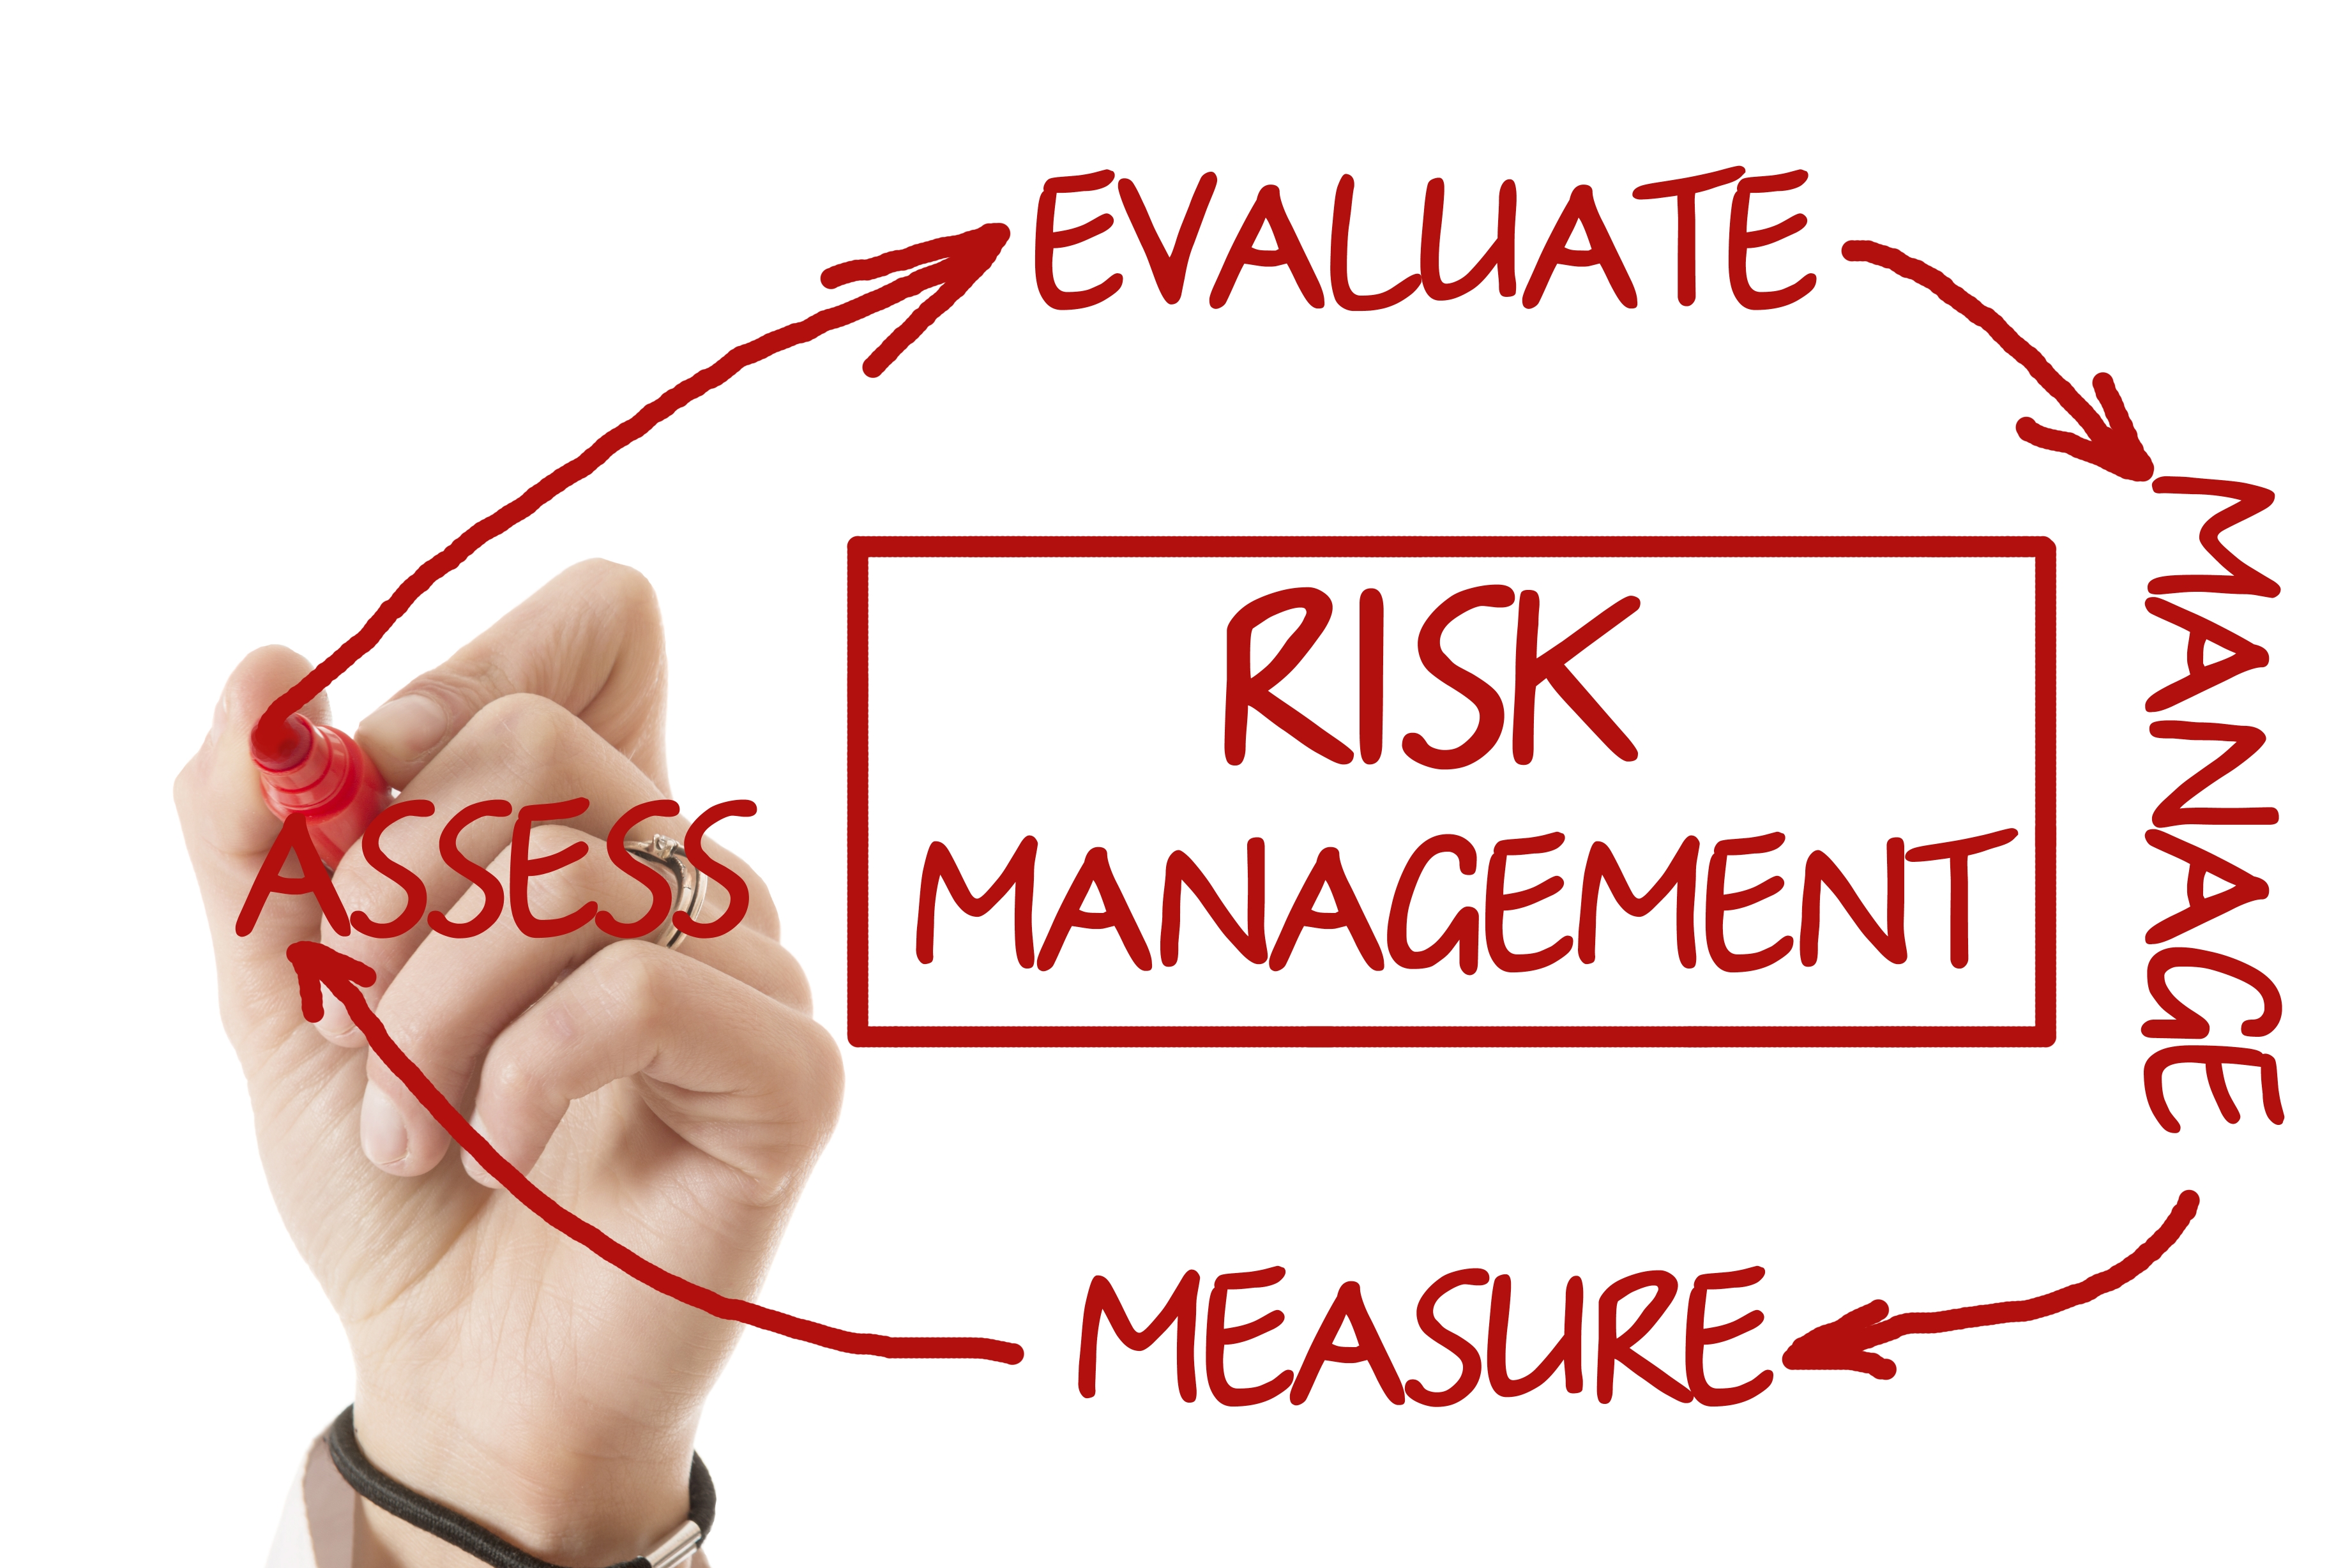 hand drawing risk management cycle on see though panel - evaluate, manage, measure and assess